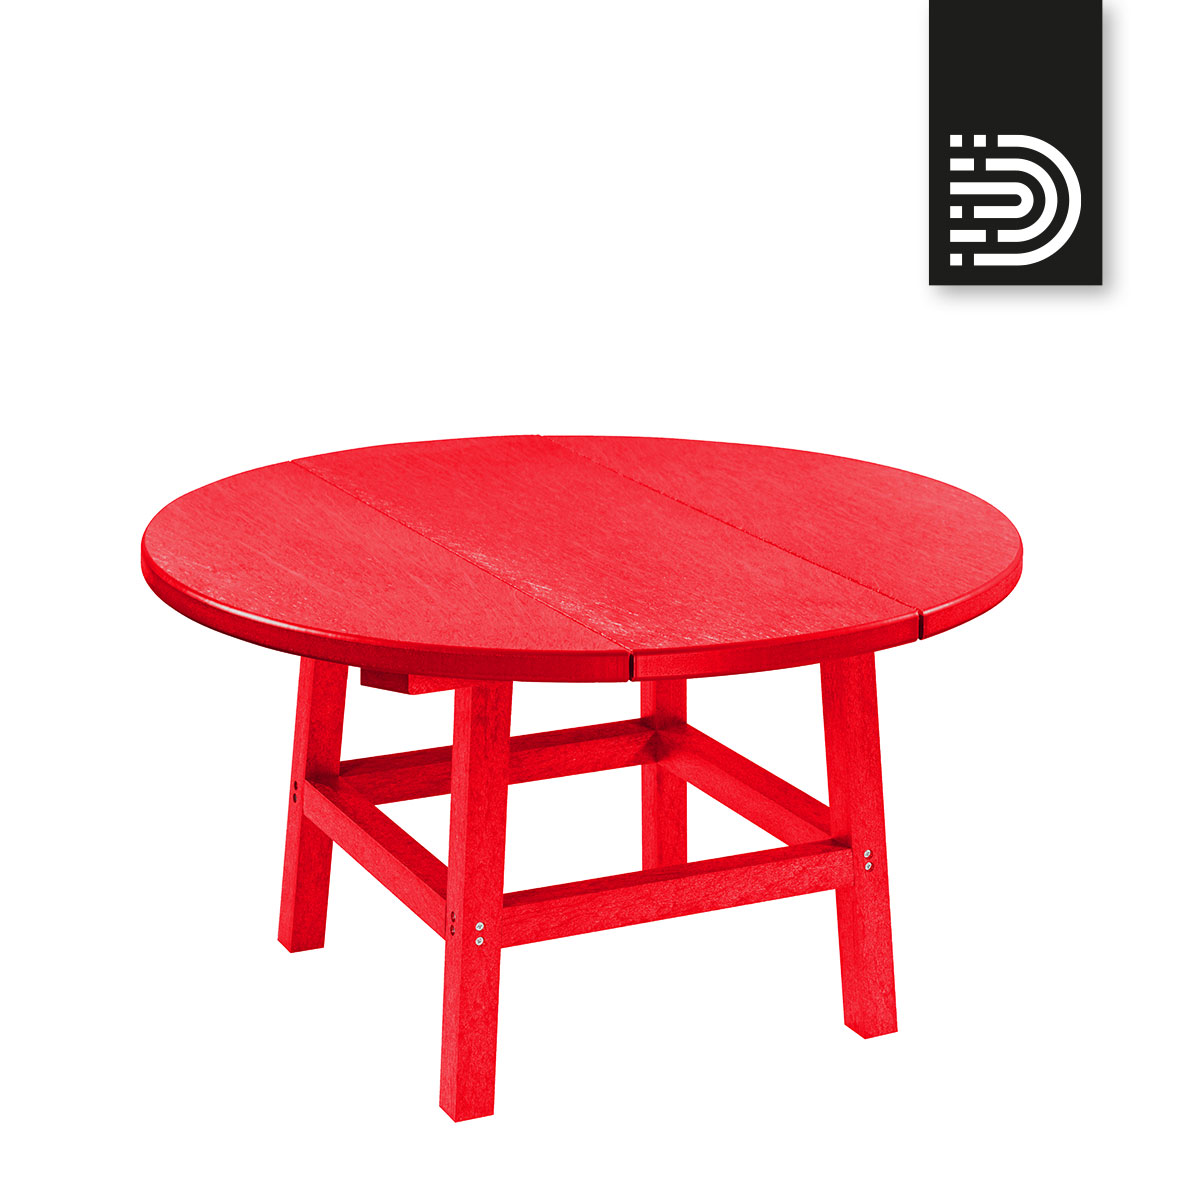 Cocktail Table in red 01- TB01+TT03/02